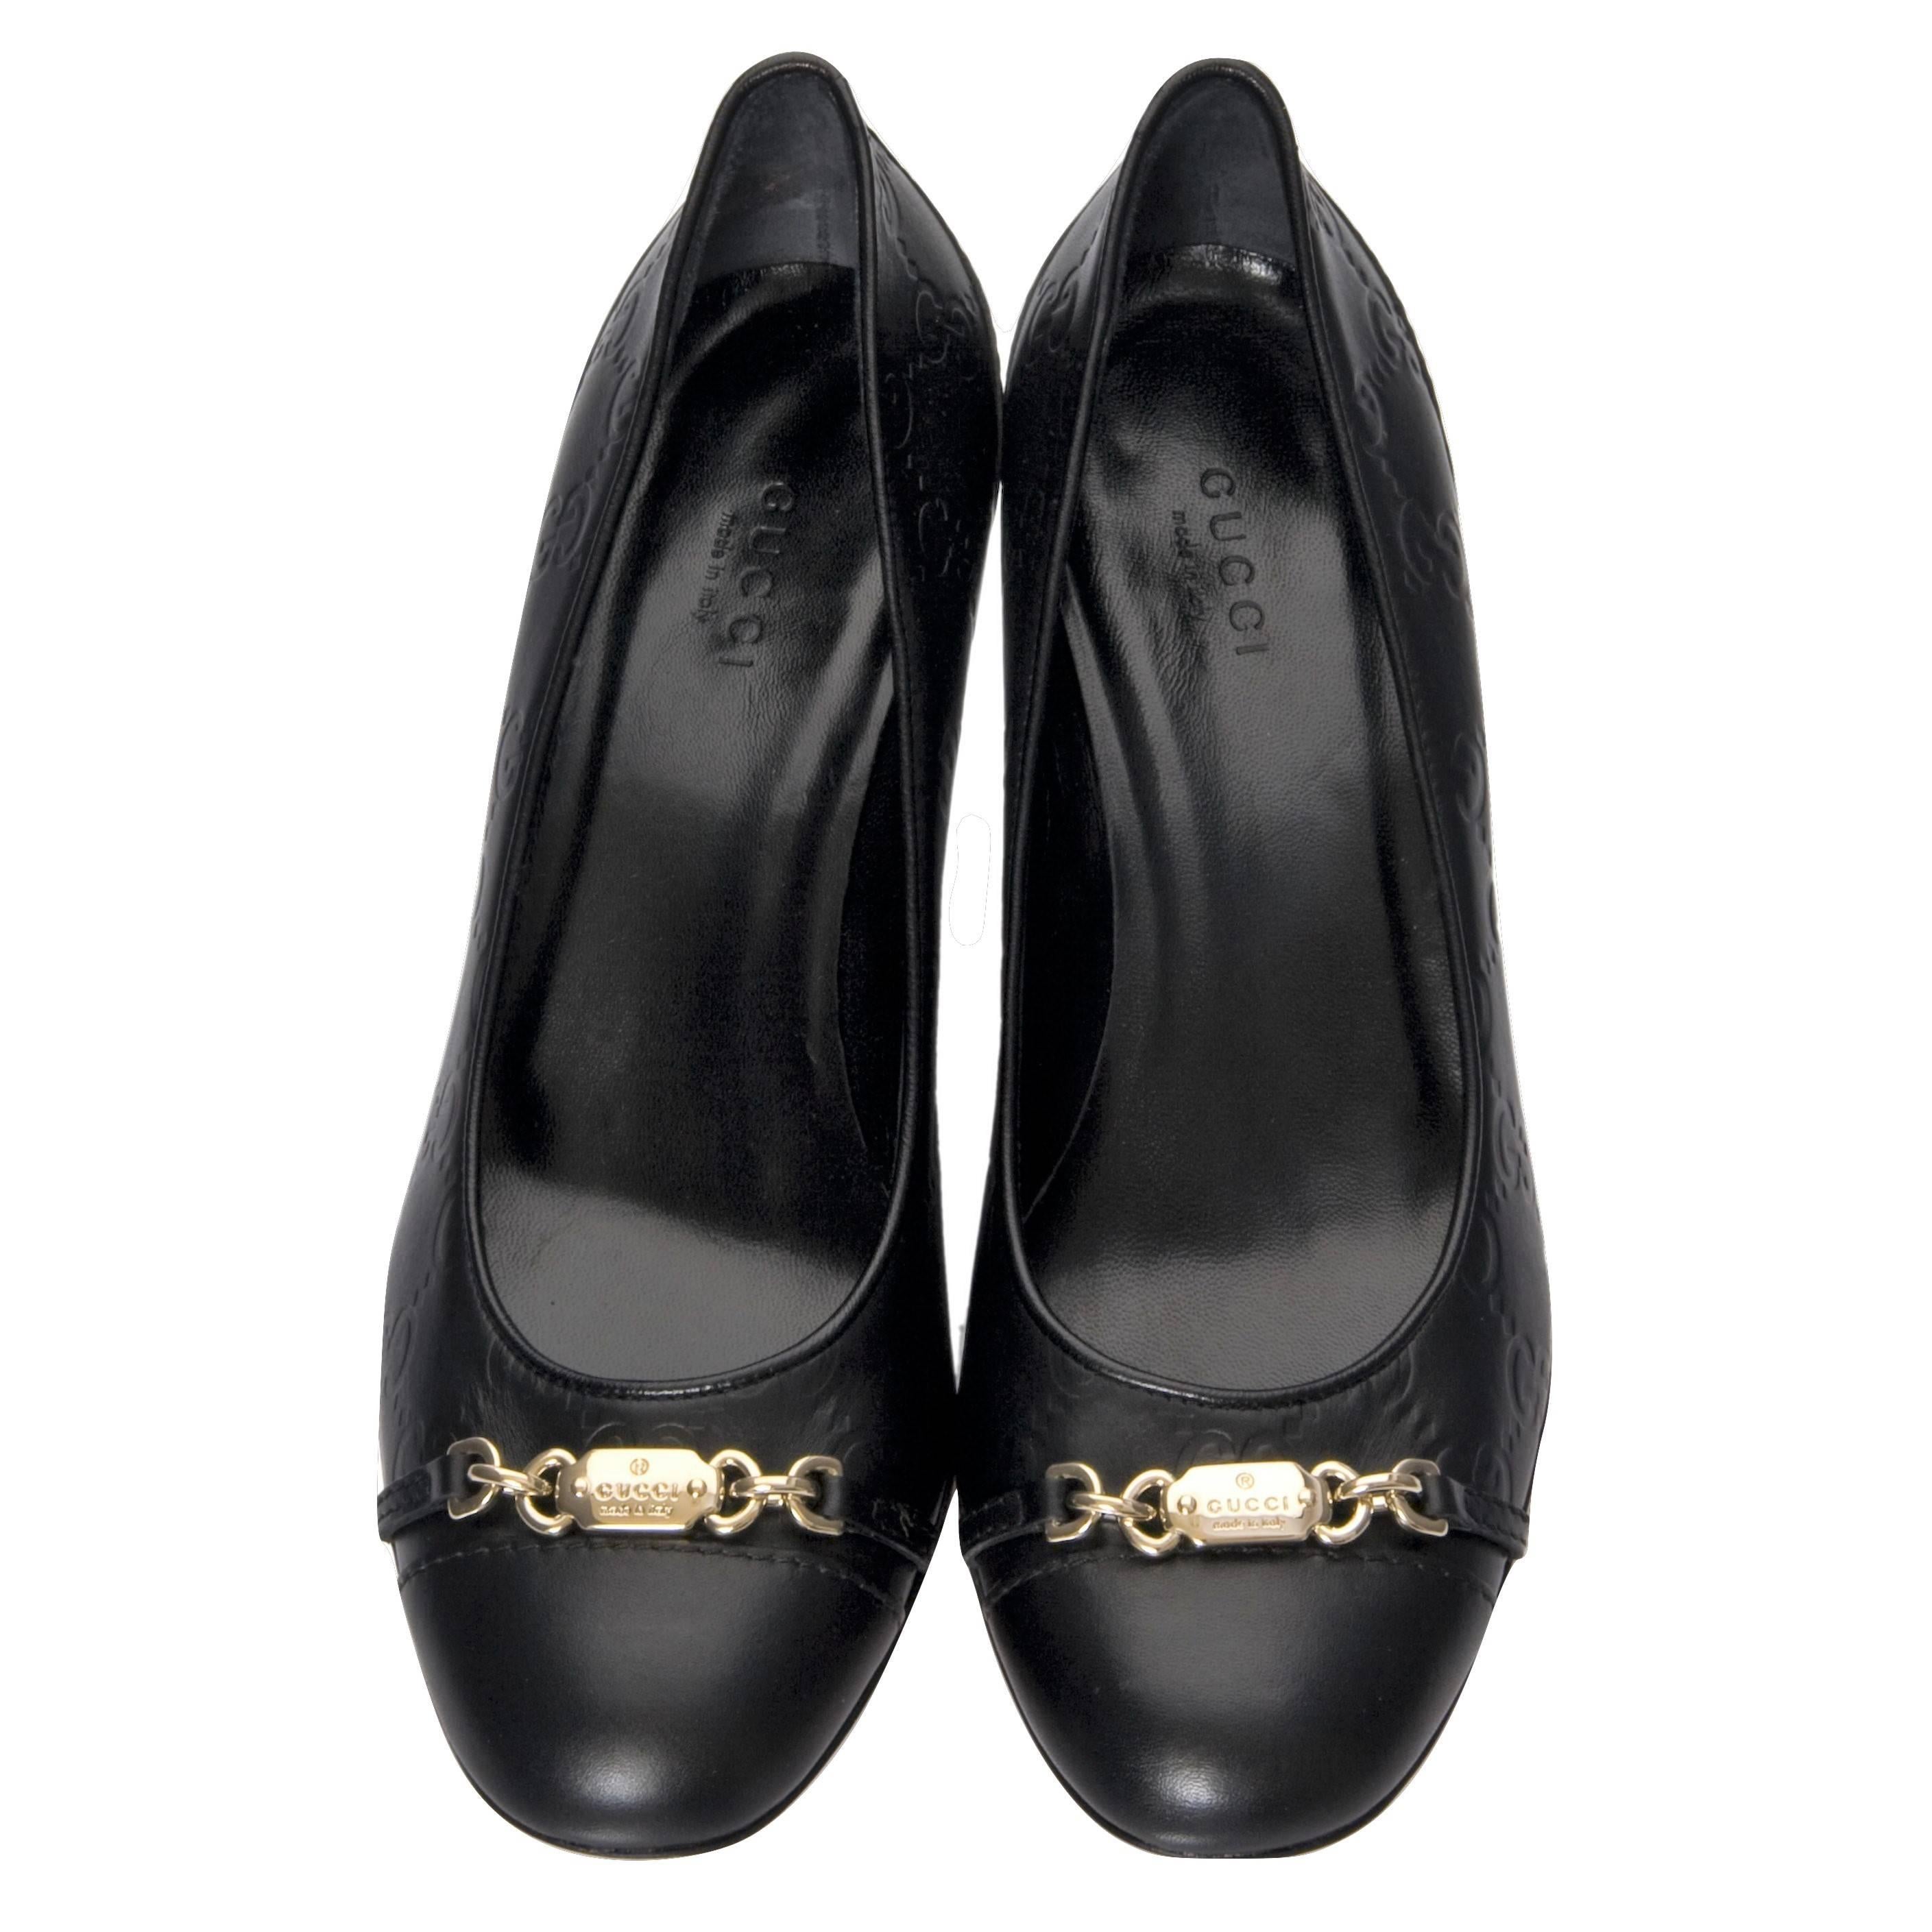 Black New Tom Ford for Gucci New GG Leather Guccissima Pumps Heels Sz 36